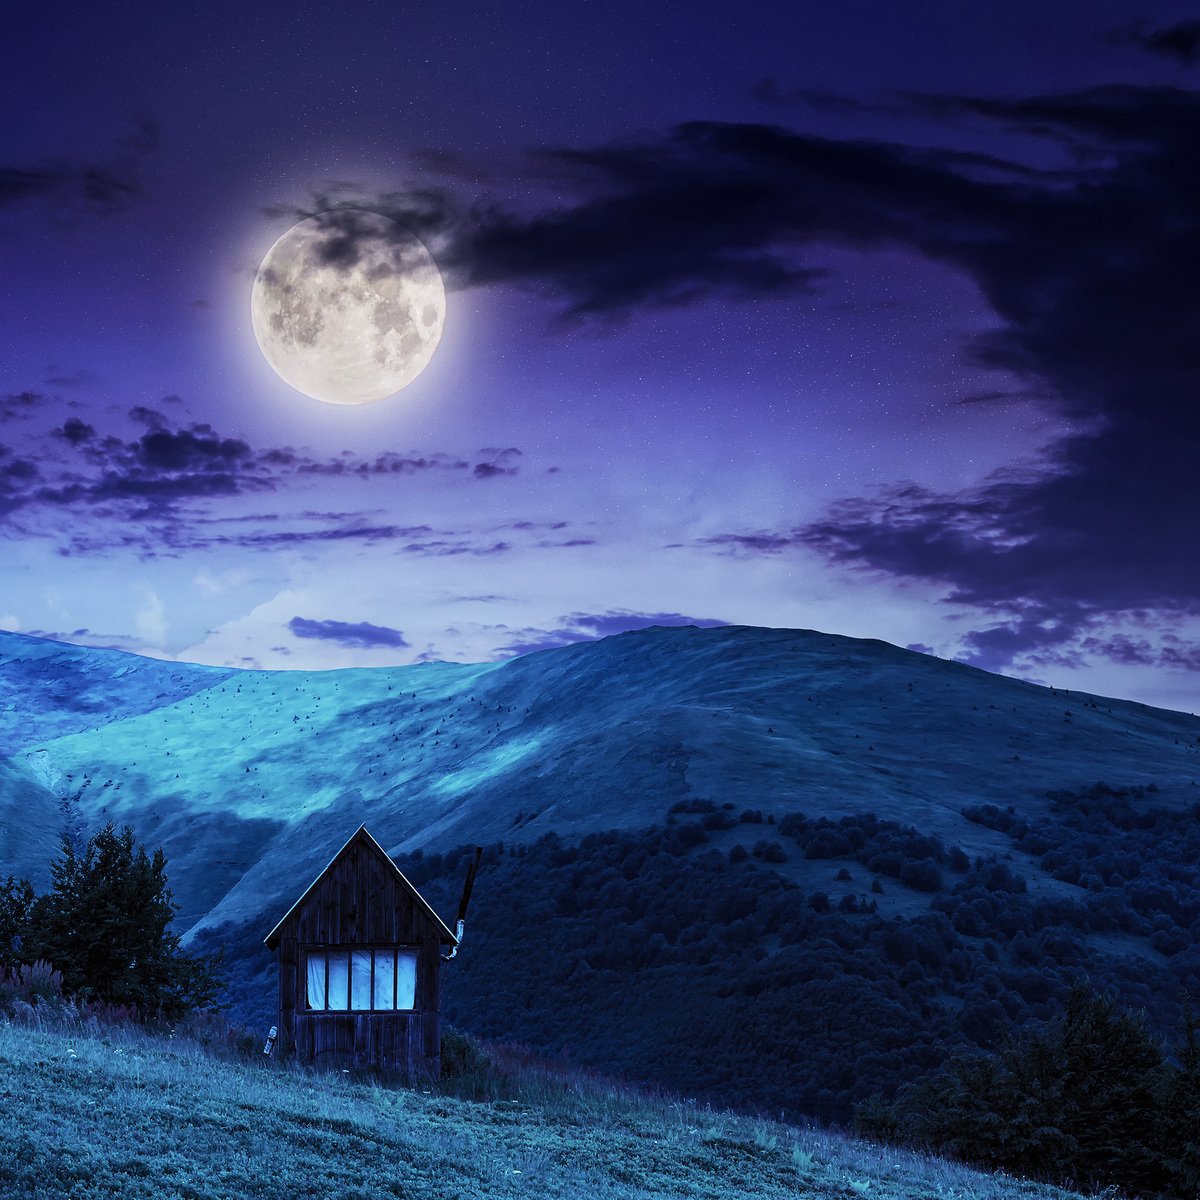 an image of a night scene with a cabin